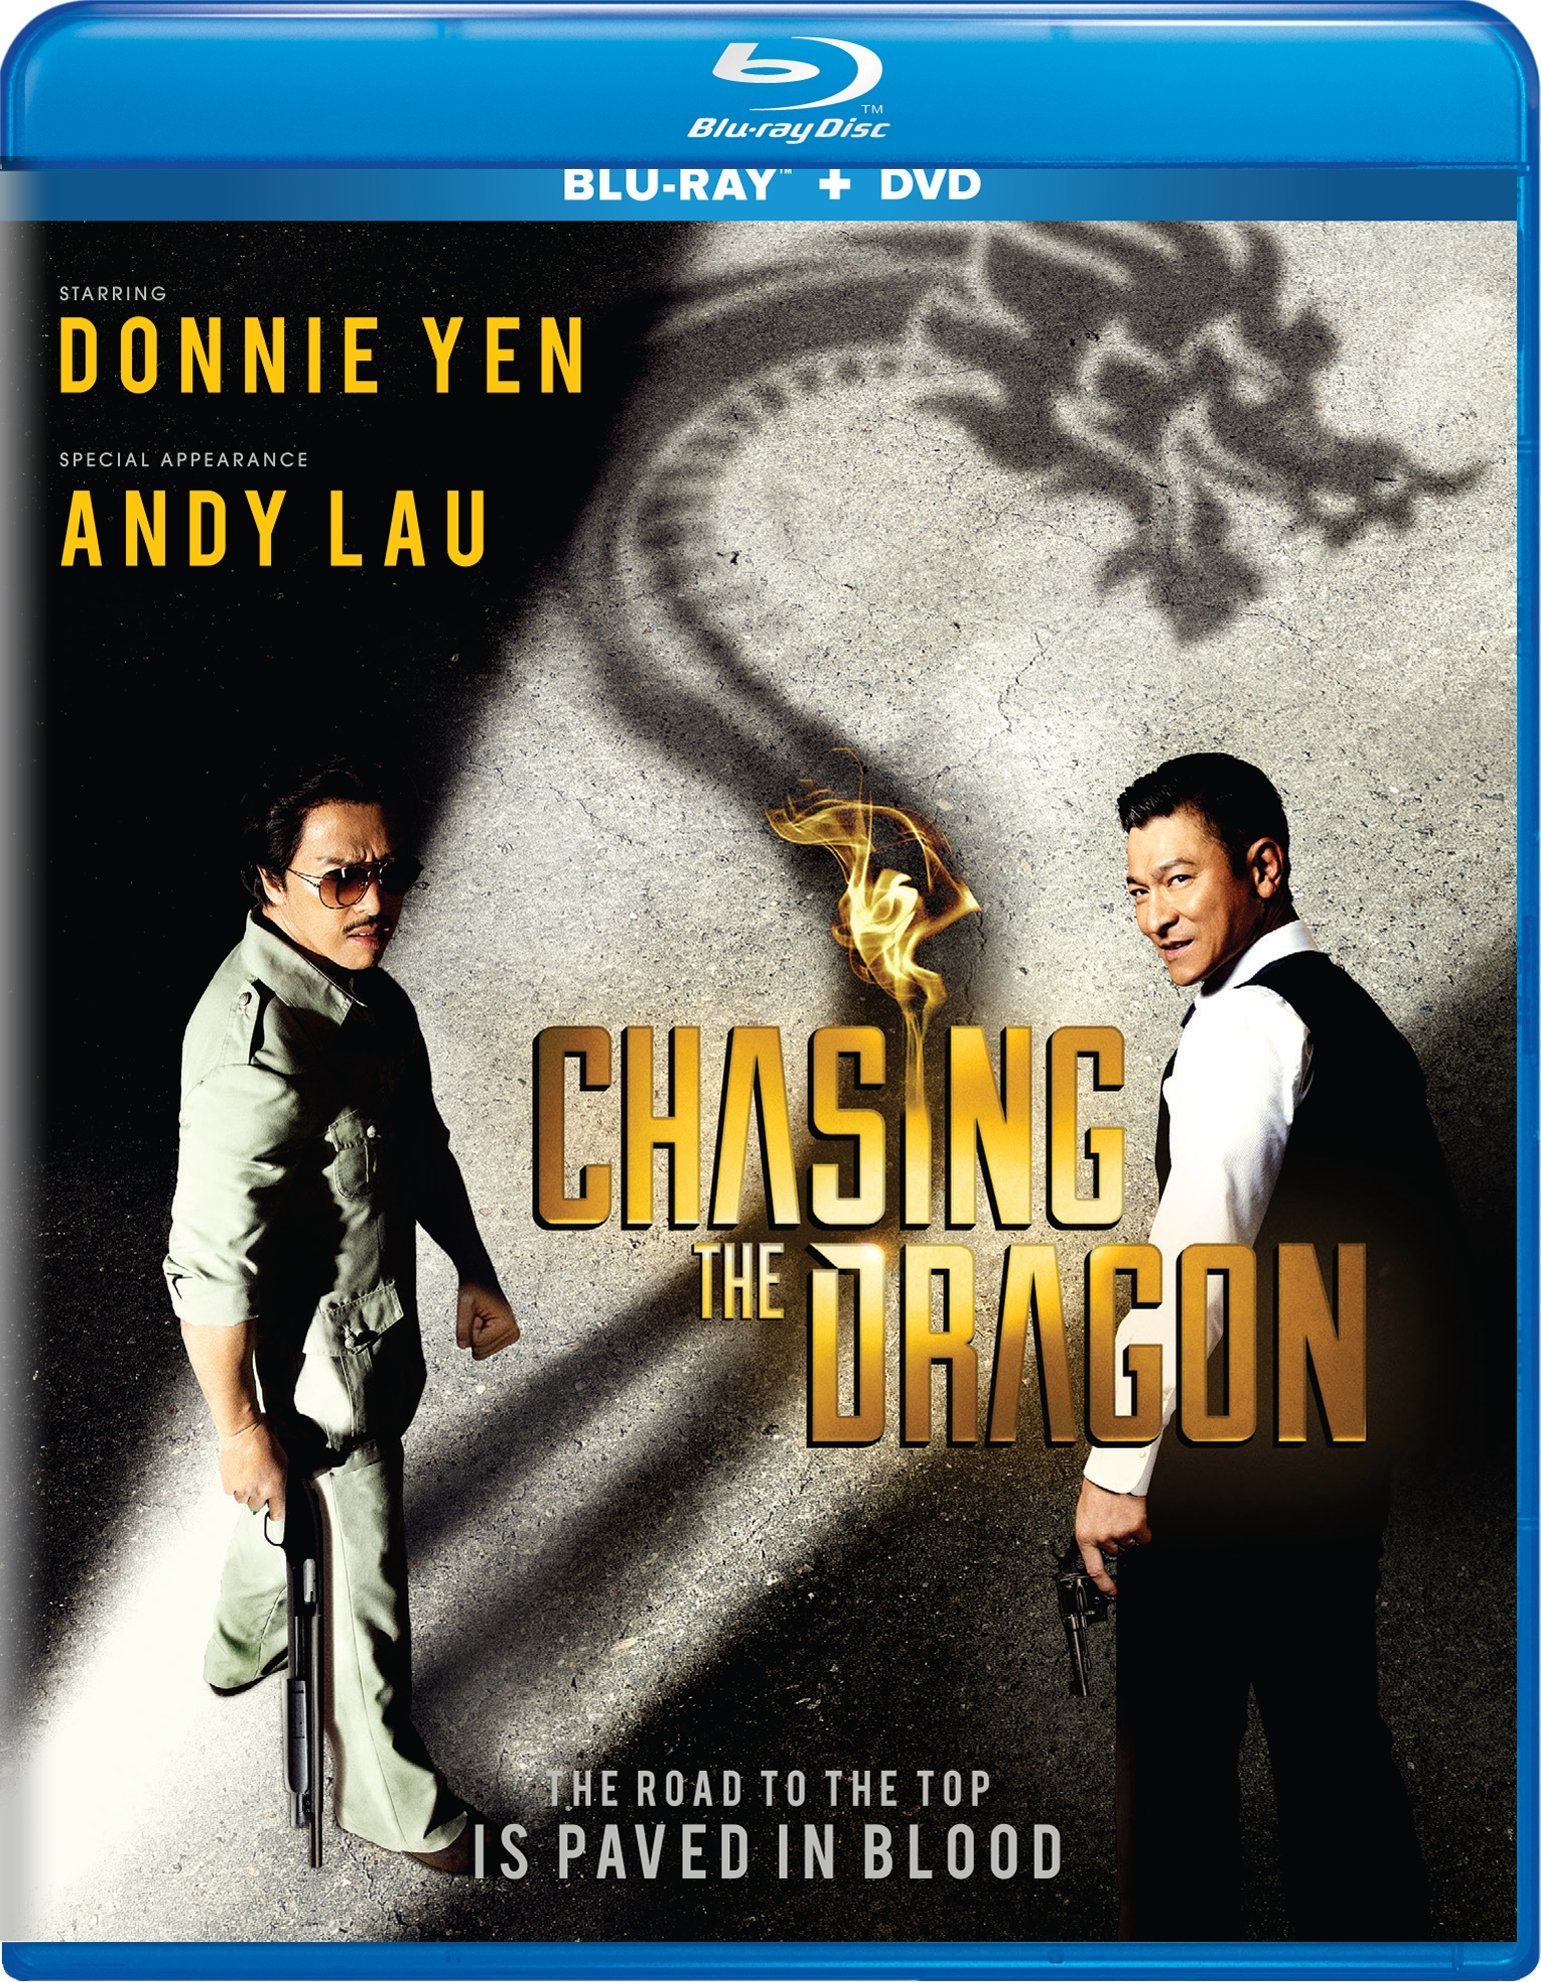 Chasing the Dragon DVD Release Date January 23, 2018